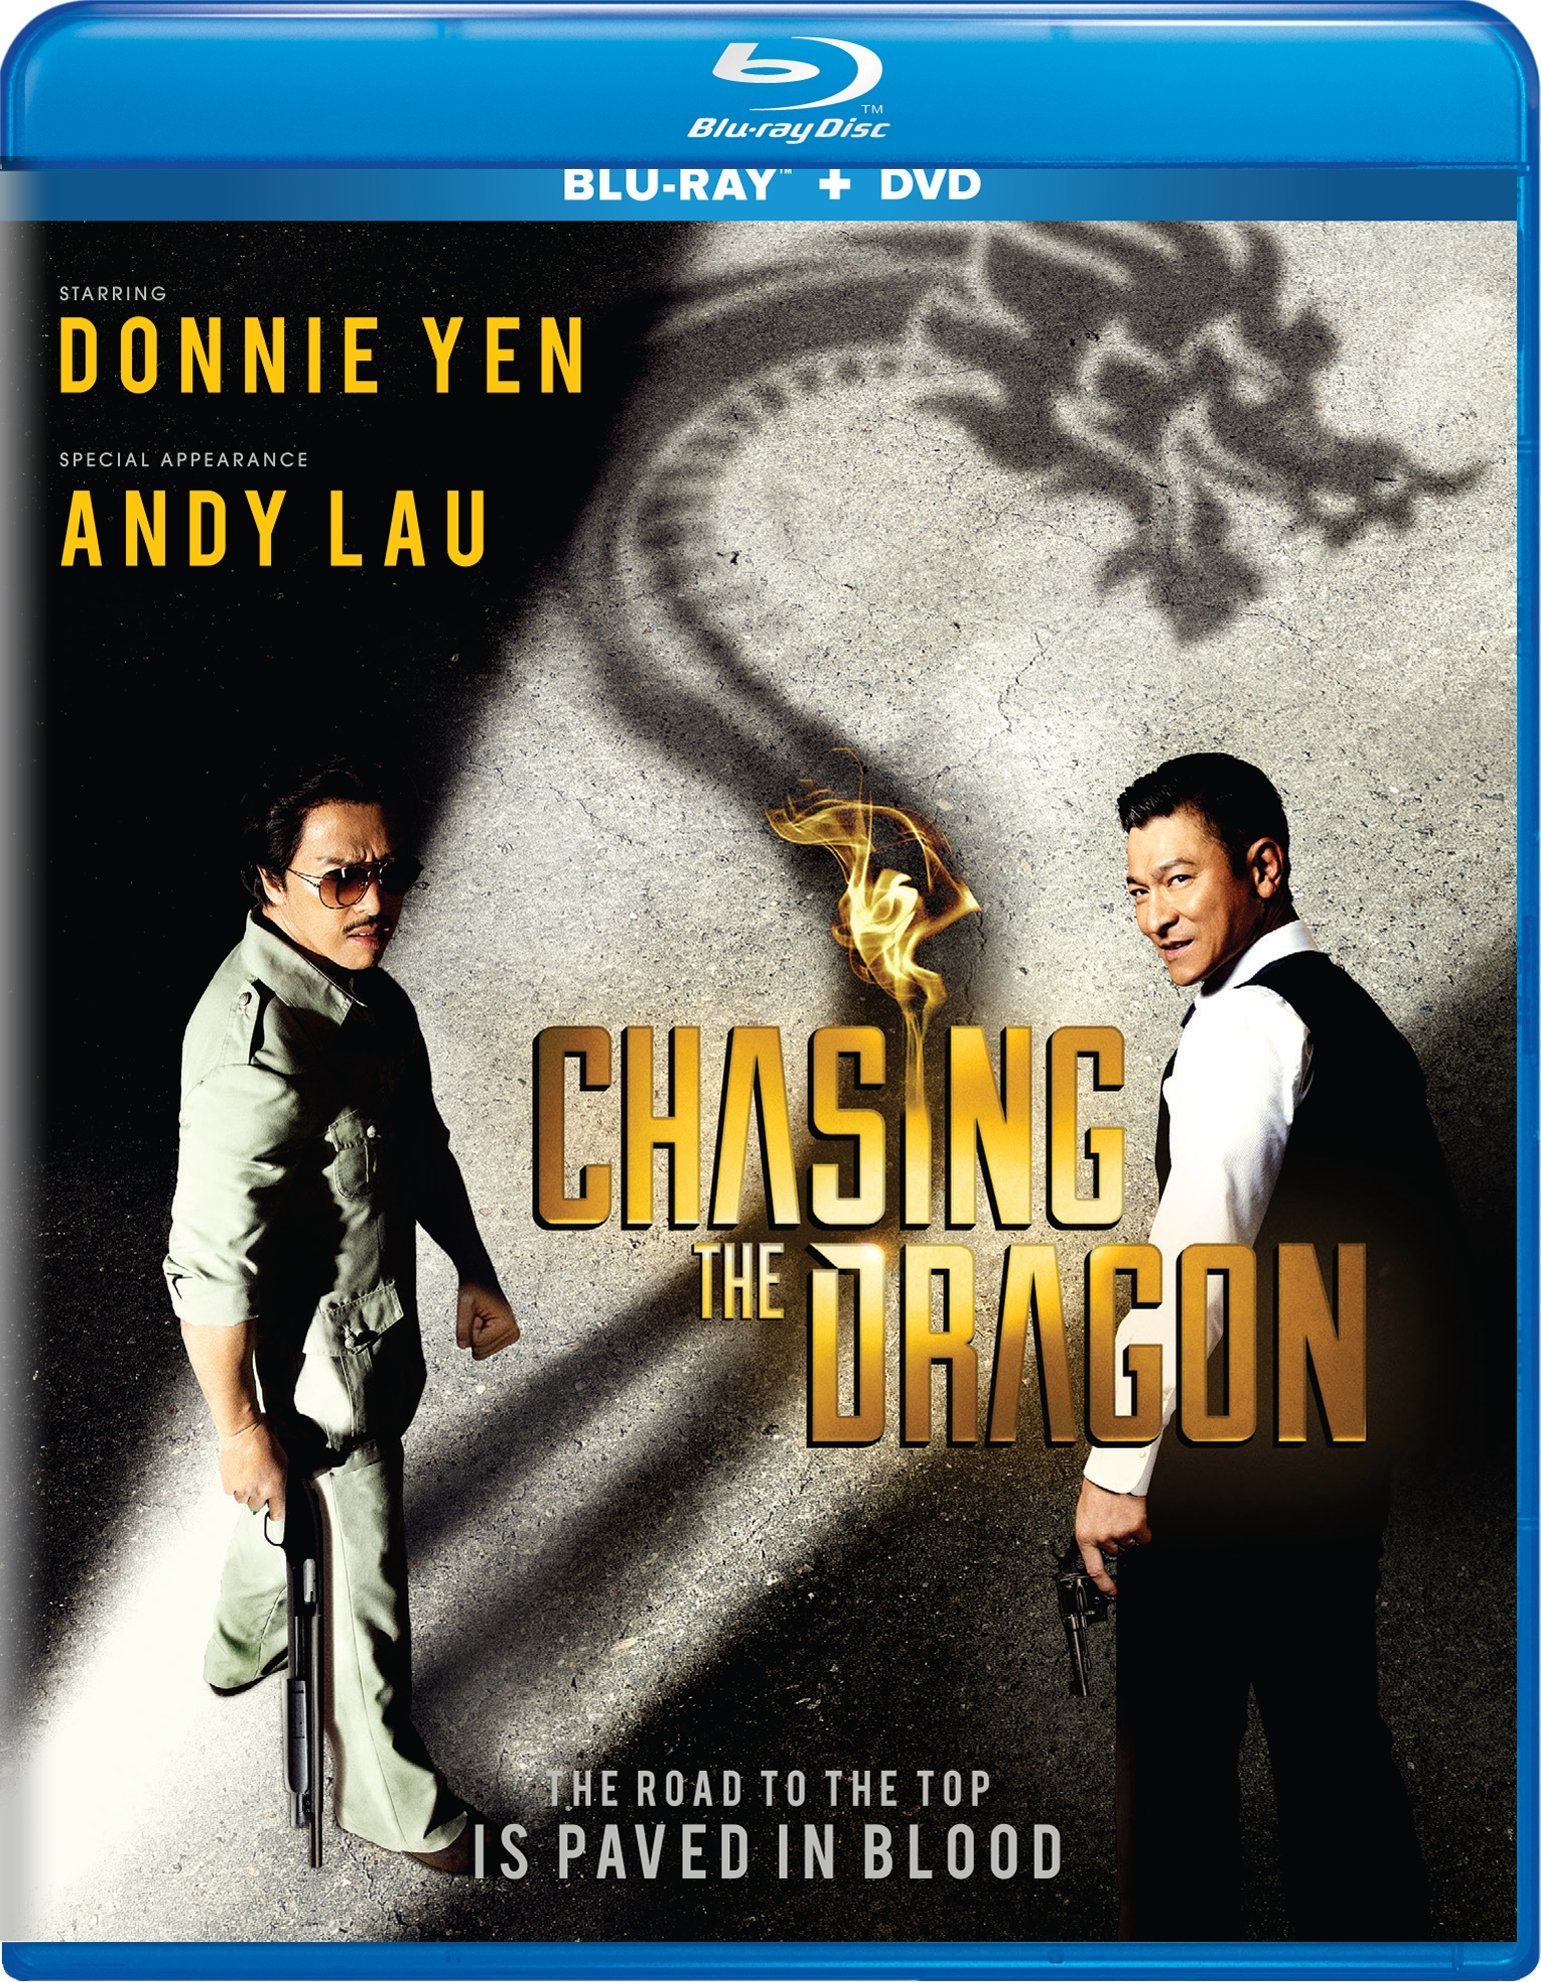 Chasing the Dragon DVD Release Date January 23, 2018